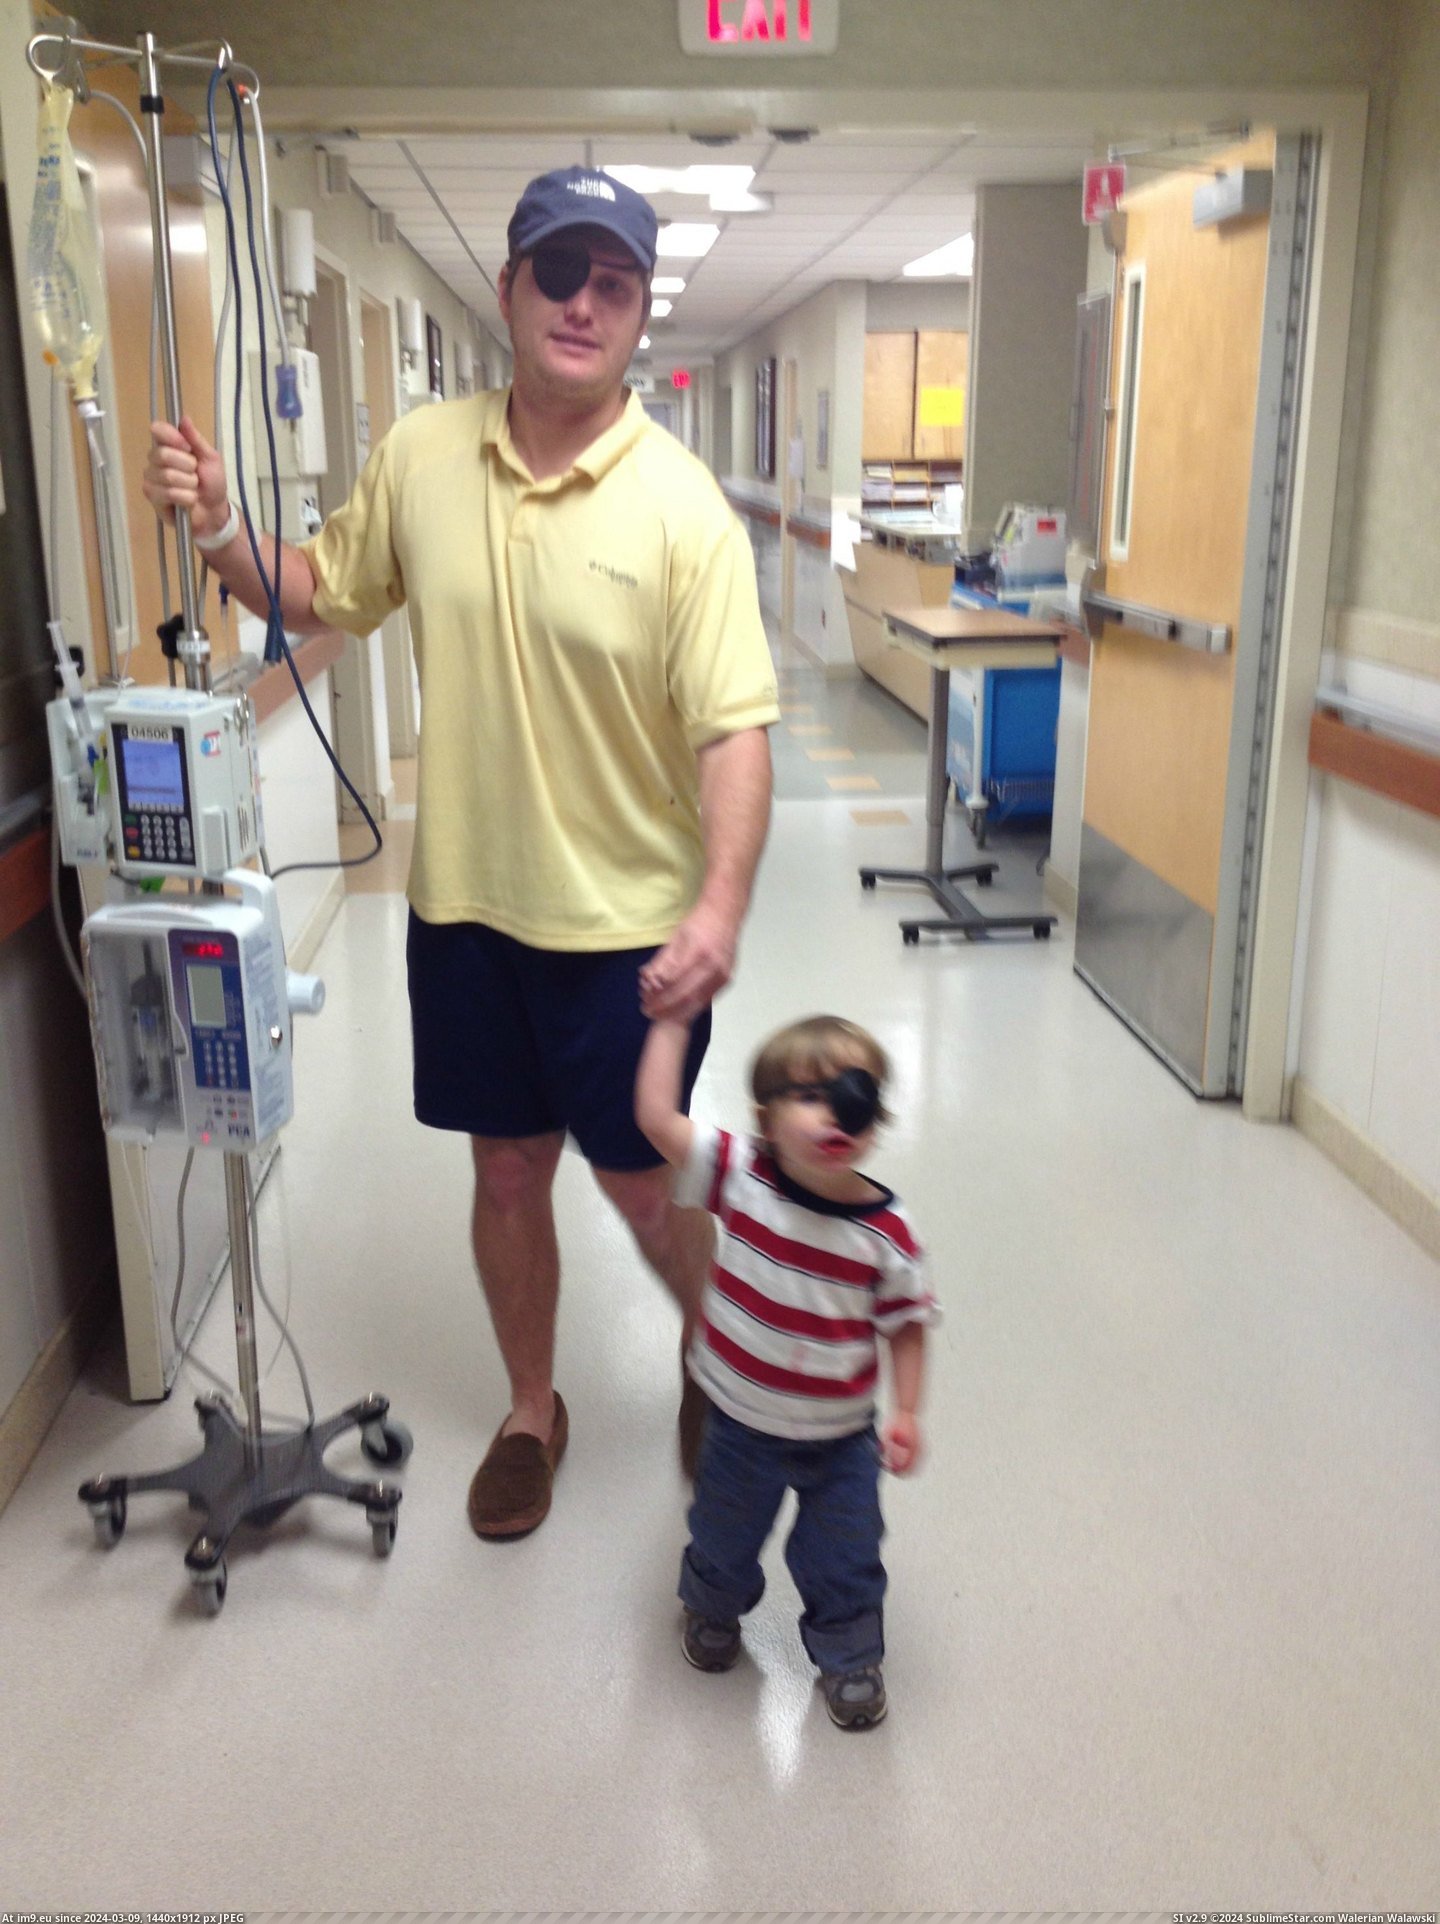 #Son #Walk #Bleed #Brainstem #Helping #Learn [Pics] After a bleed in my brainstem, this is my son, helping me learn to walk again. Pic. (Image of album My r/PICS favs))